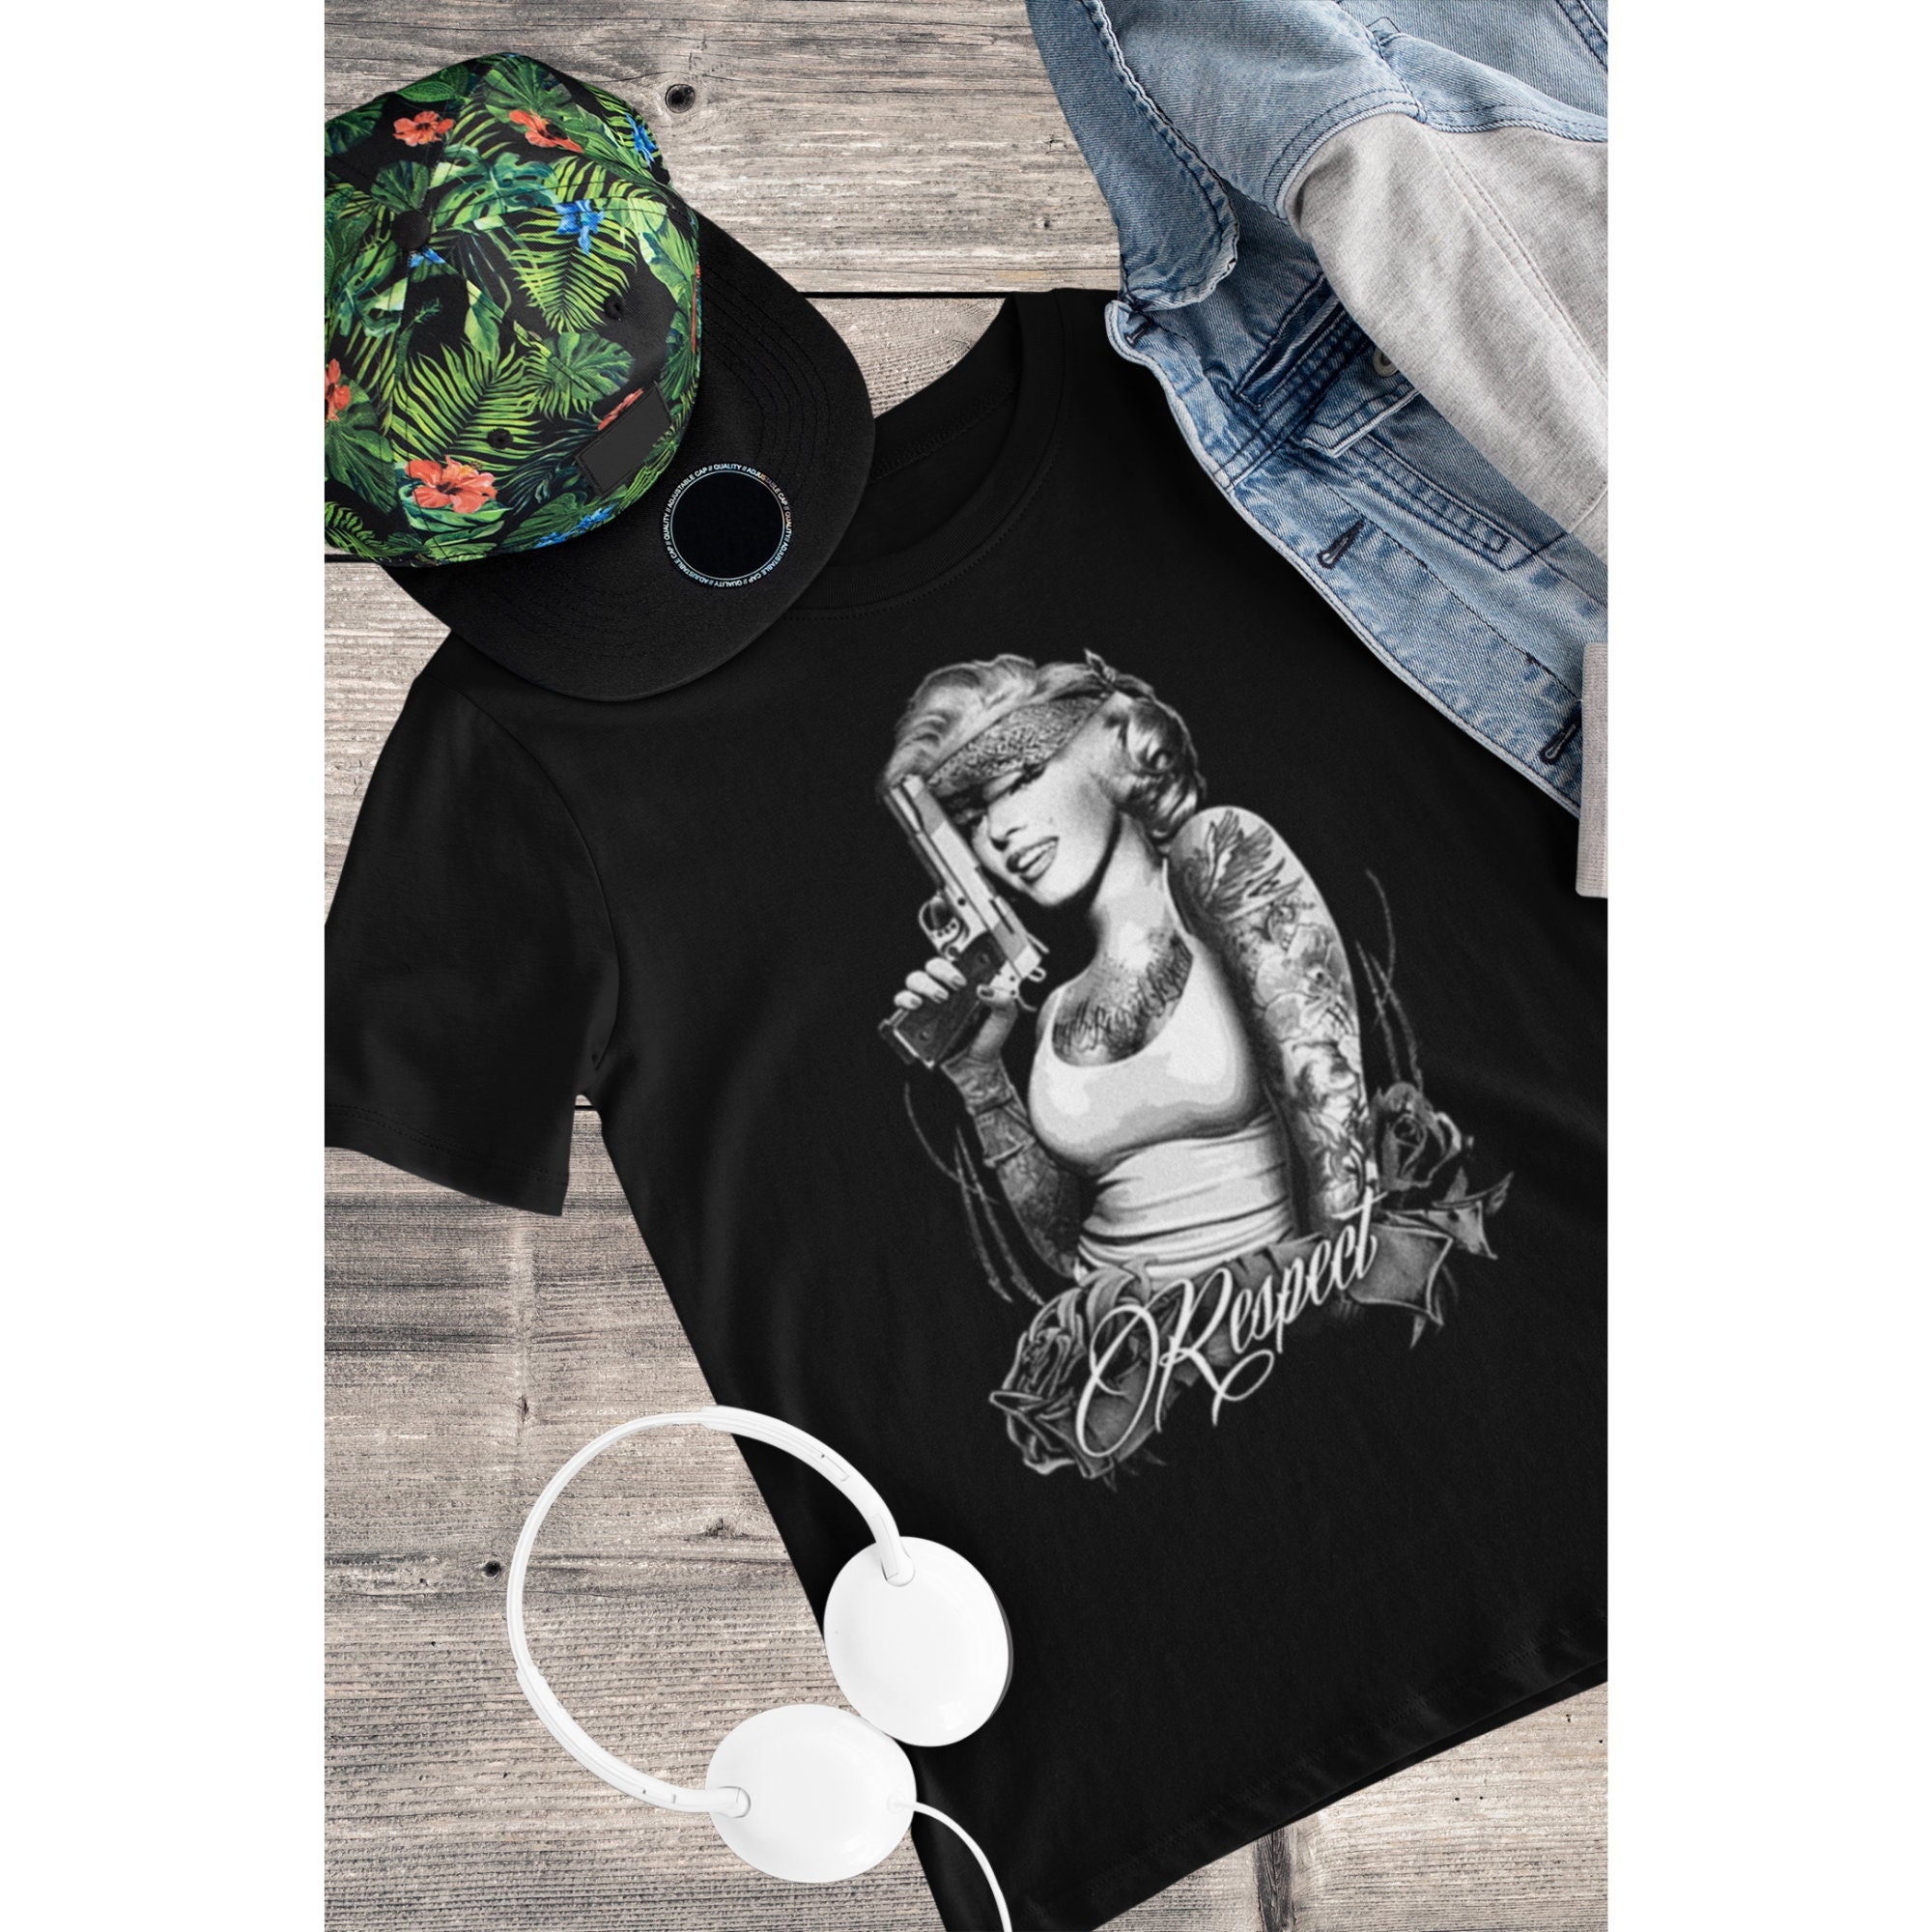  Marilyn Monroe Marilyn Respect V-Neck T-Shirt : Clothing, Shoes  & Jewelry